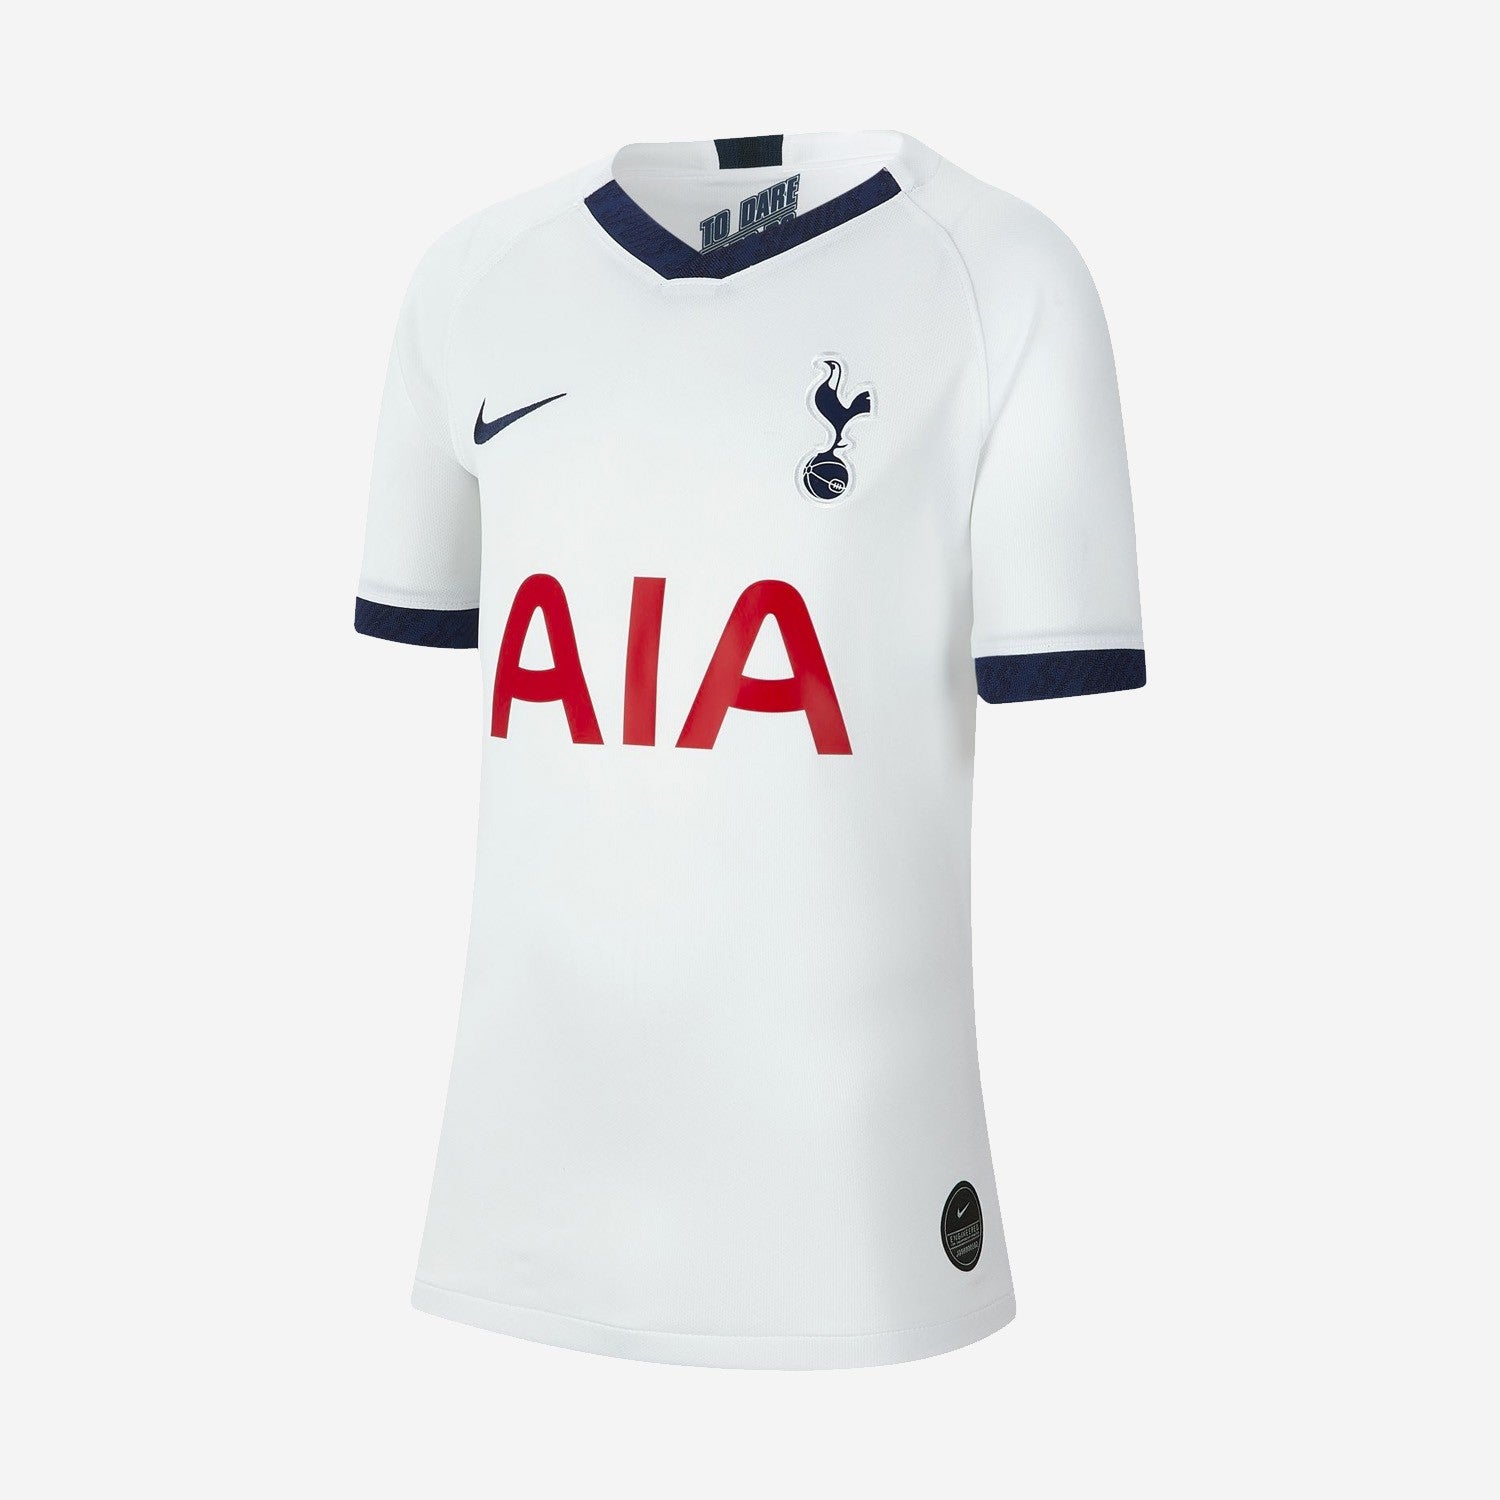 Tottenham release new home and away kits for 2019/20